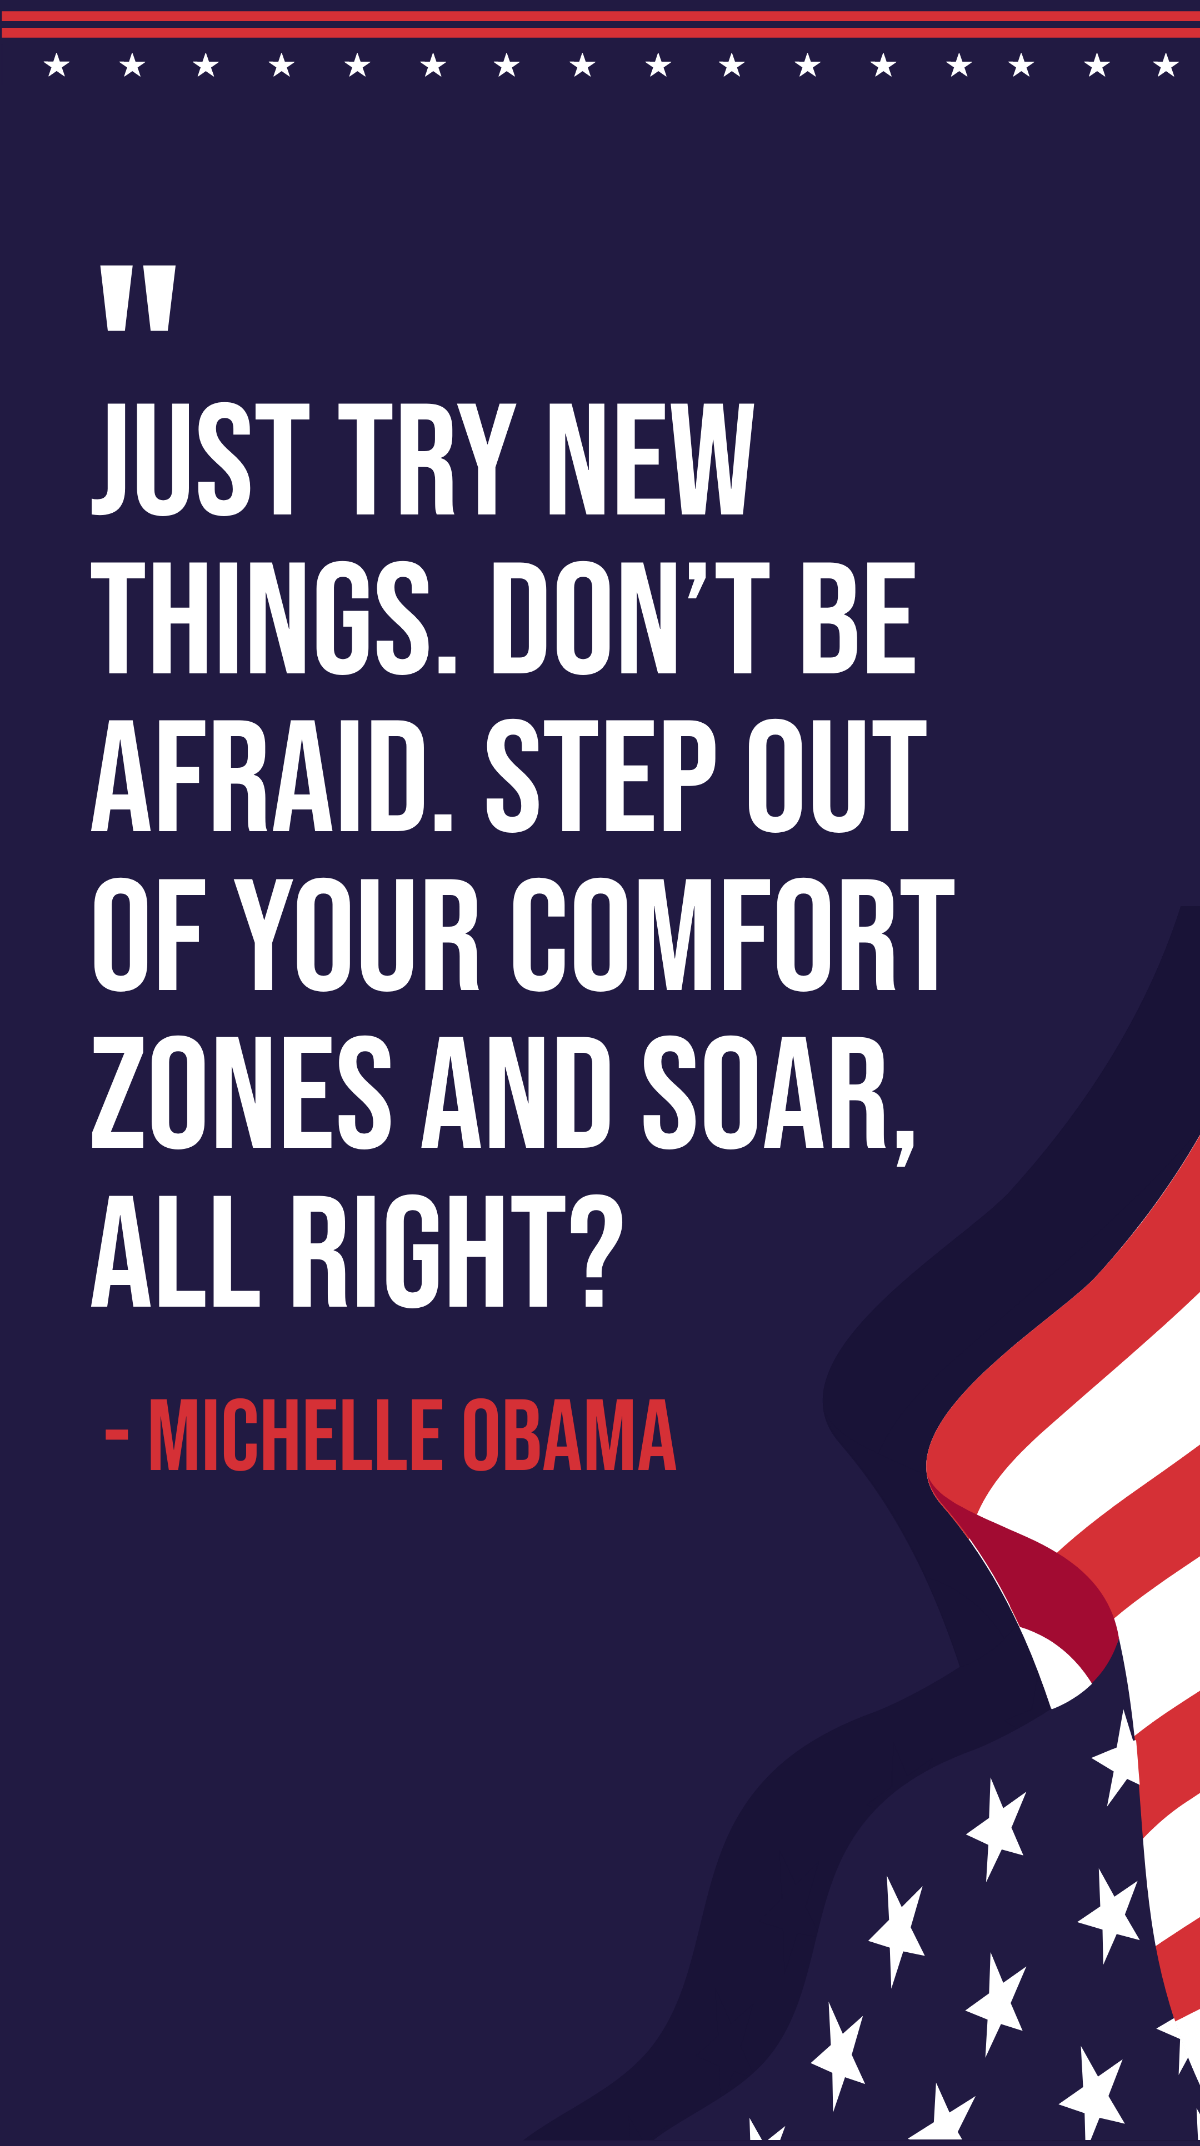 Michelle Obama - Just try new things. Don’t be afraid. Step out of your comfort zones and soar, all right?  Template